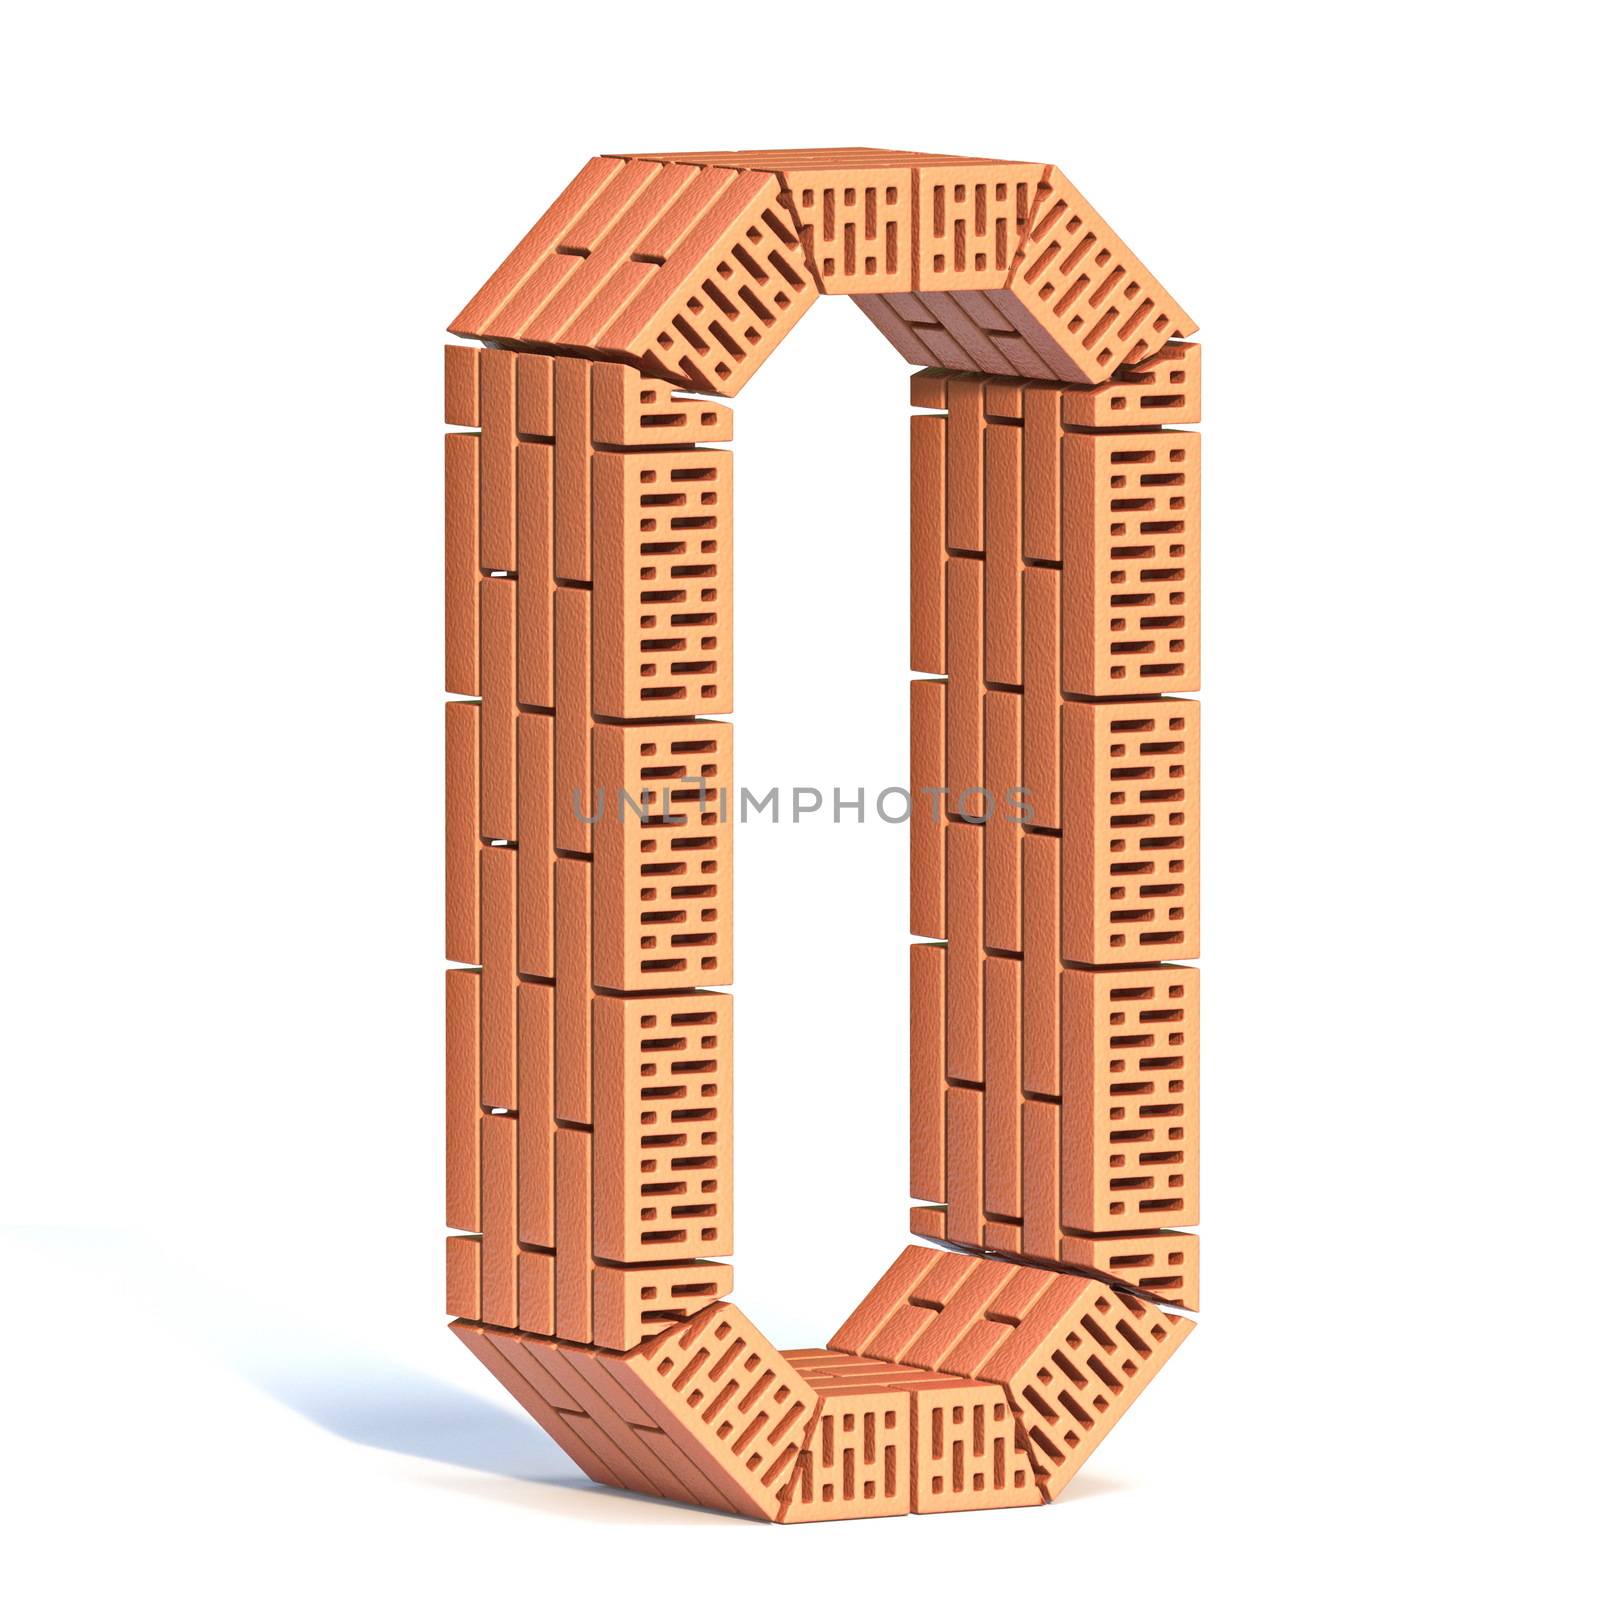 Brick wall font Letter O 3D render illustration isolated on white background